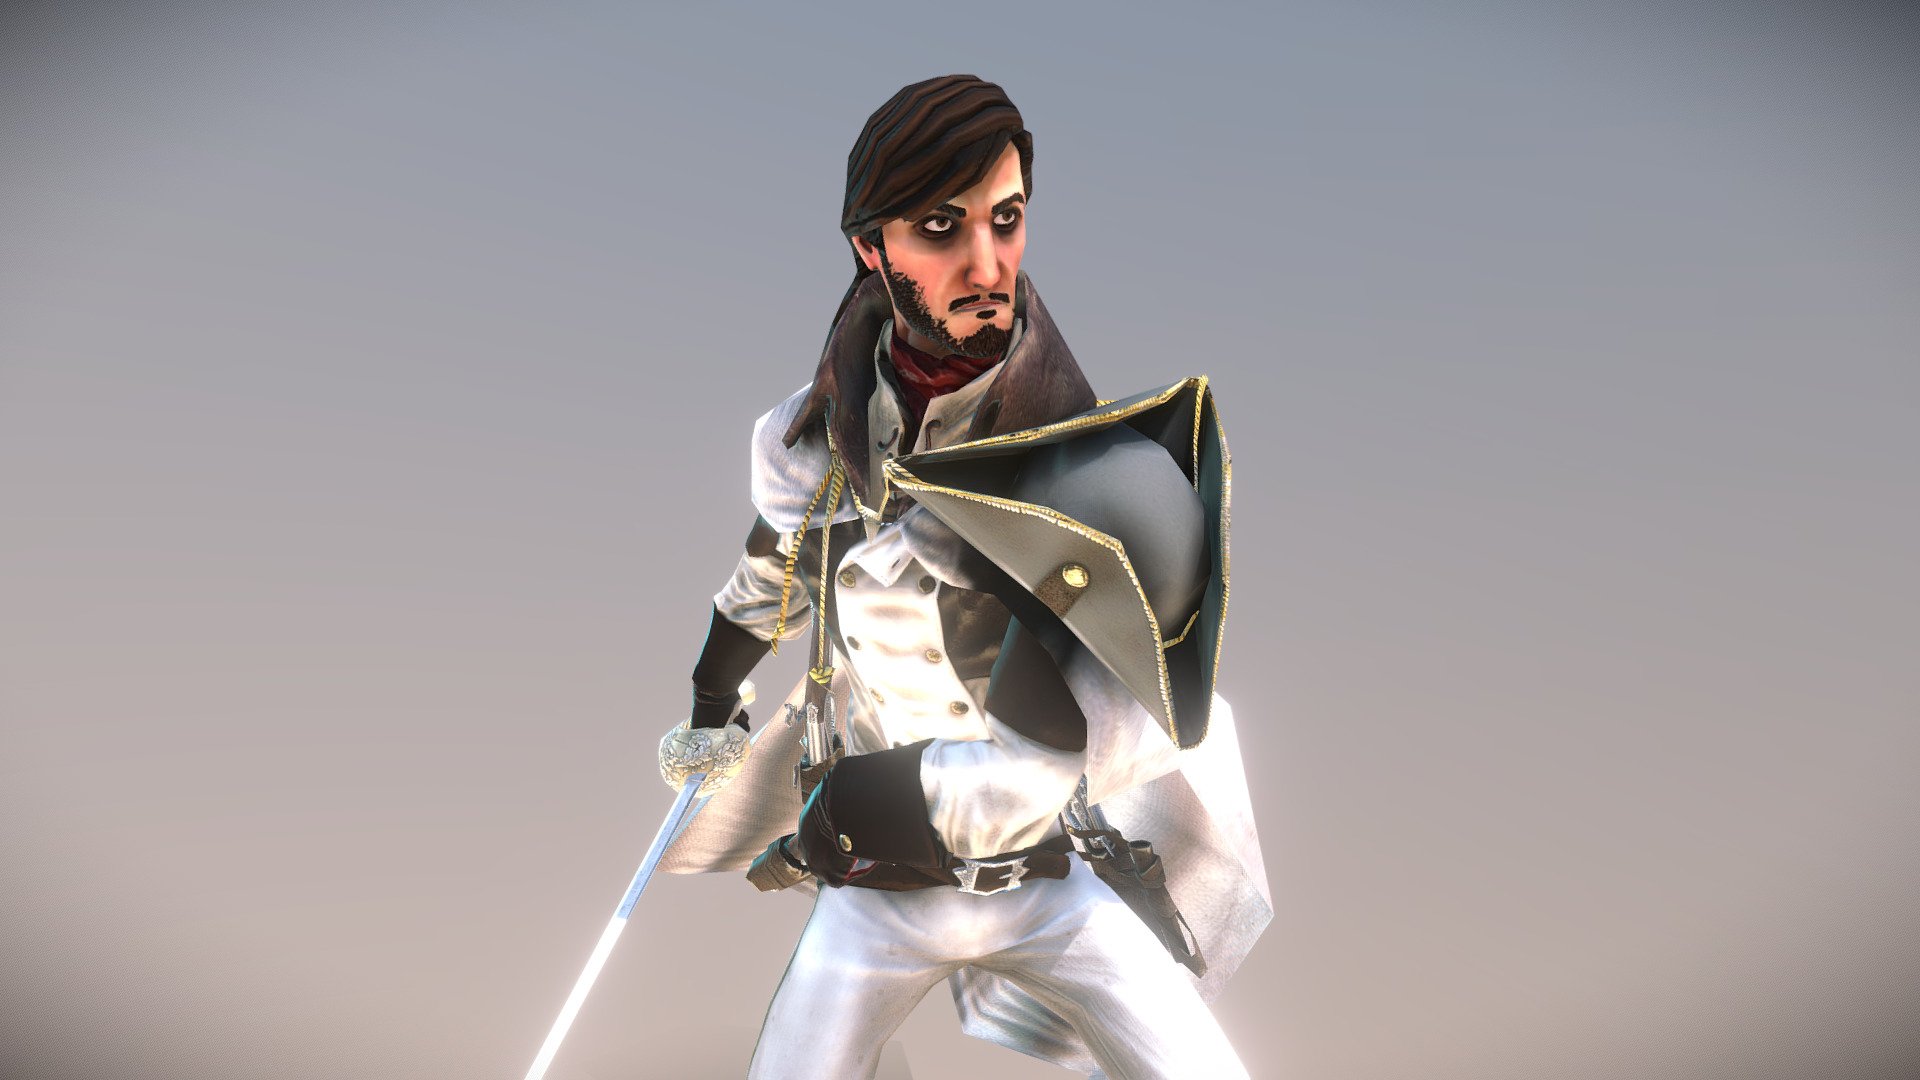 The textured, posed, low-poly version of my pirate ( https://sketchfab.com/models/6bbb25b04eca49bba762505eef25ff5d )
Textured with Quixel Ddo - Posed Low-Poly Pirate - 3D model by Snapped Celery (@snappedcelery) 3d model